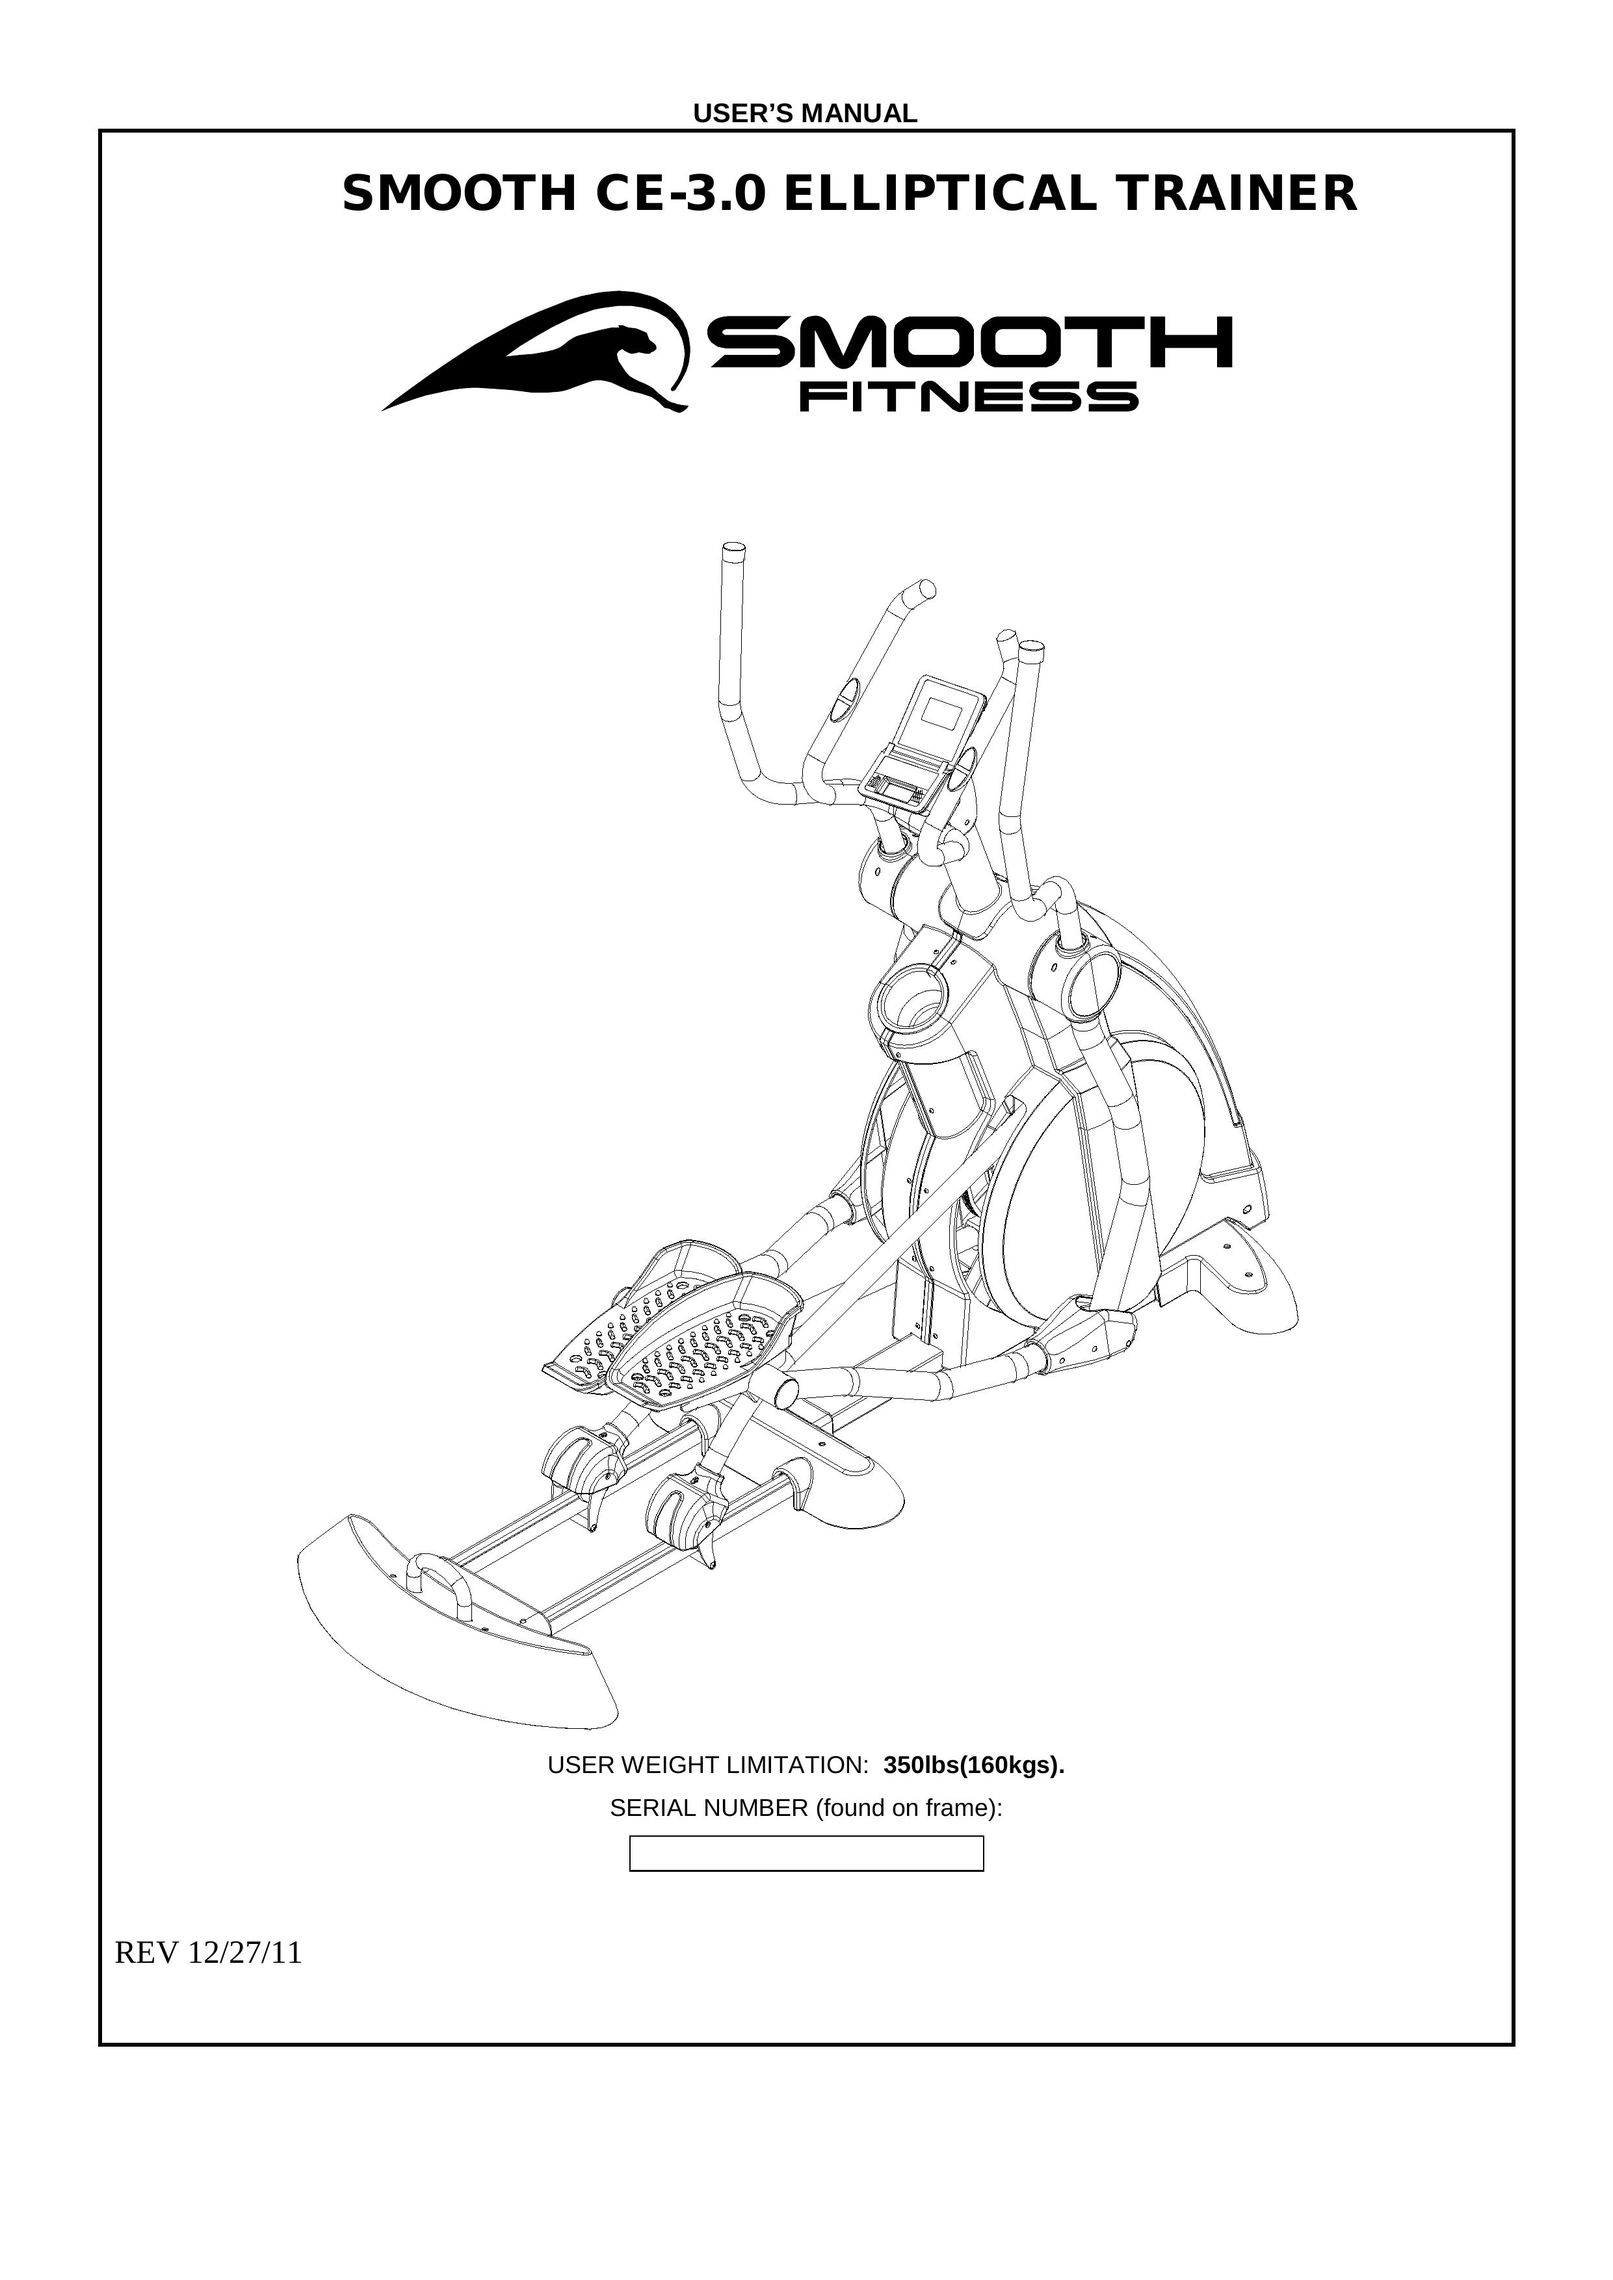 Smooth Fitness CE-3.0 Elliptical Trainer User Manual